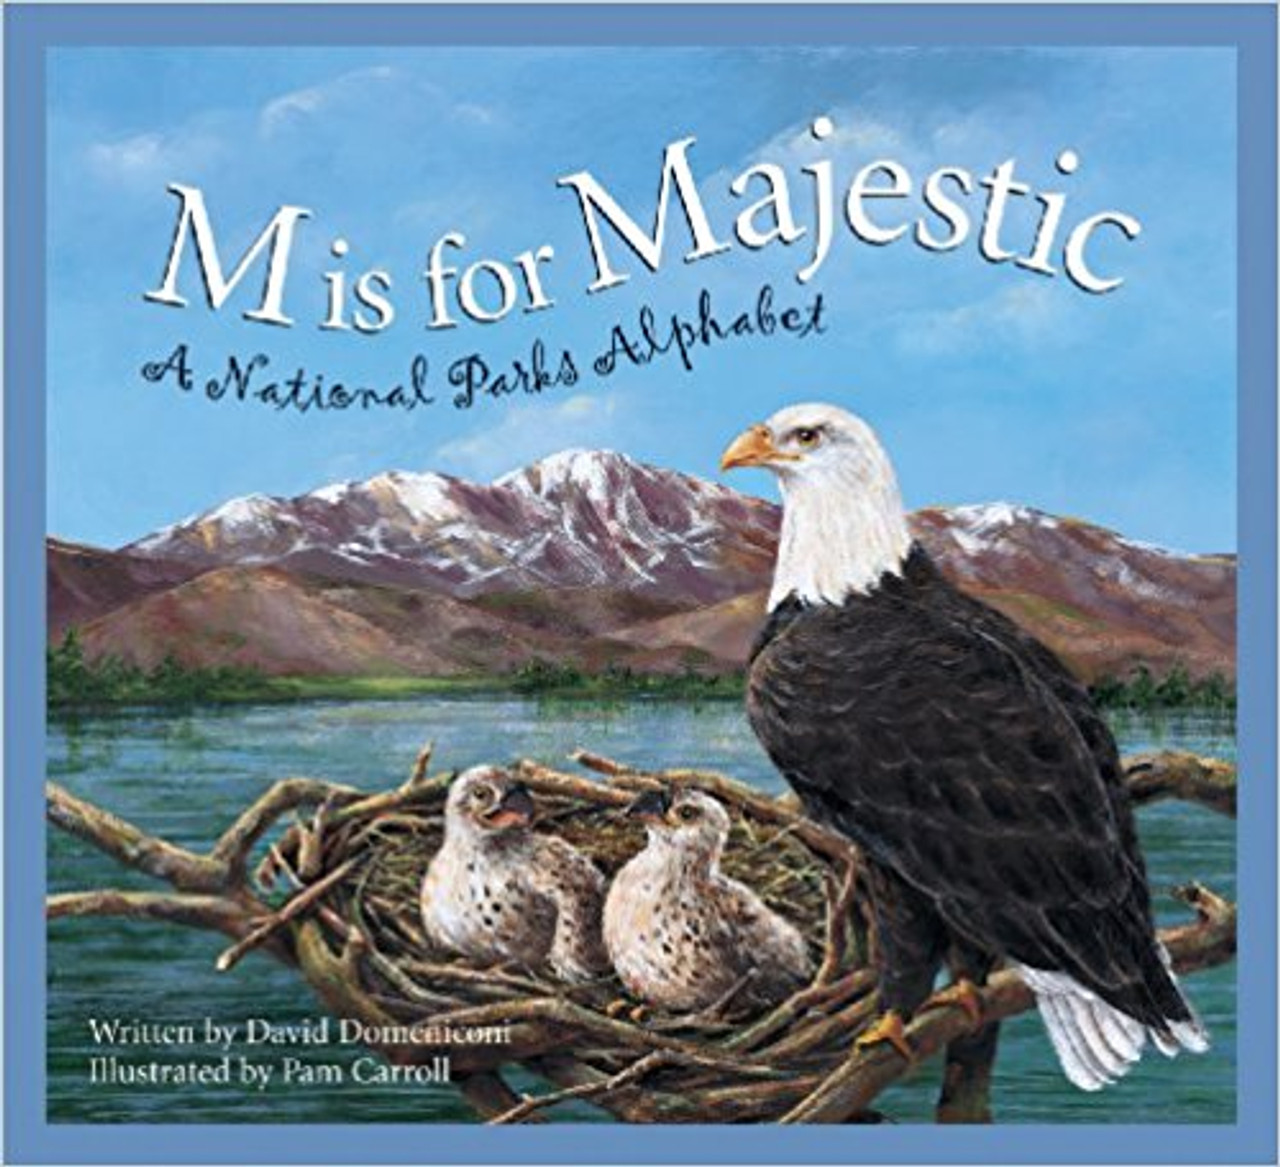 M Is for Majestic: A National Parks Alphabet by David Domeniconi